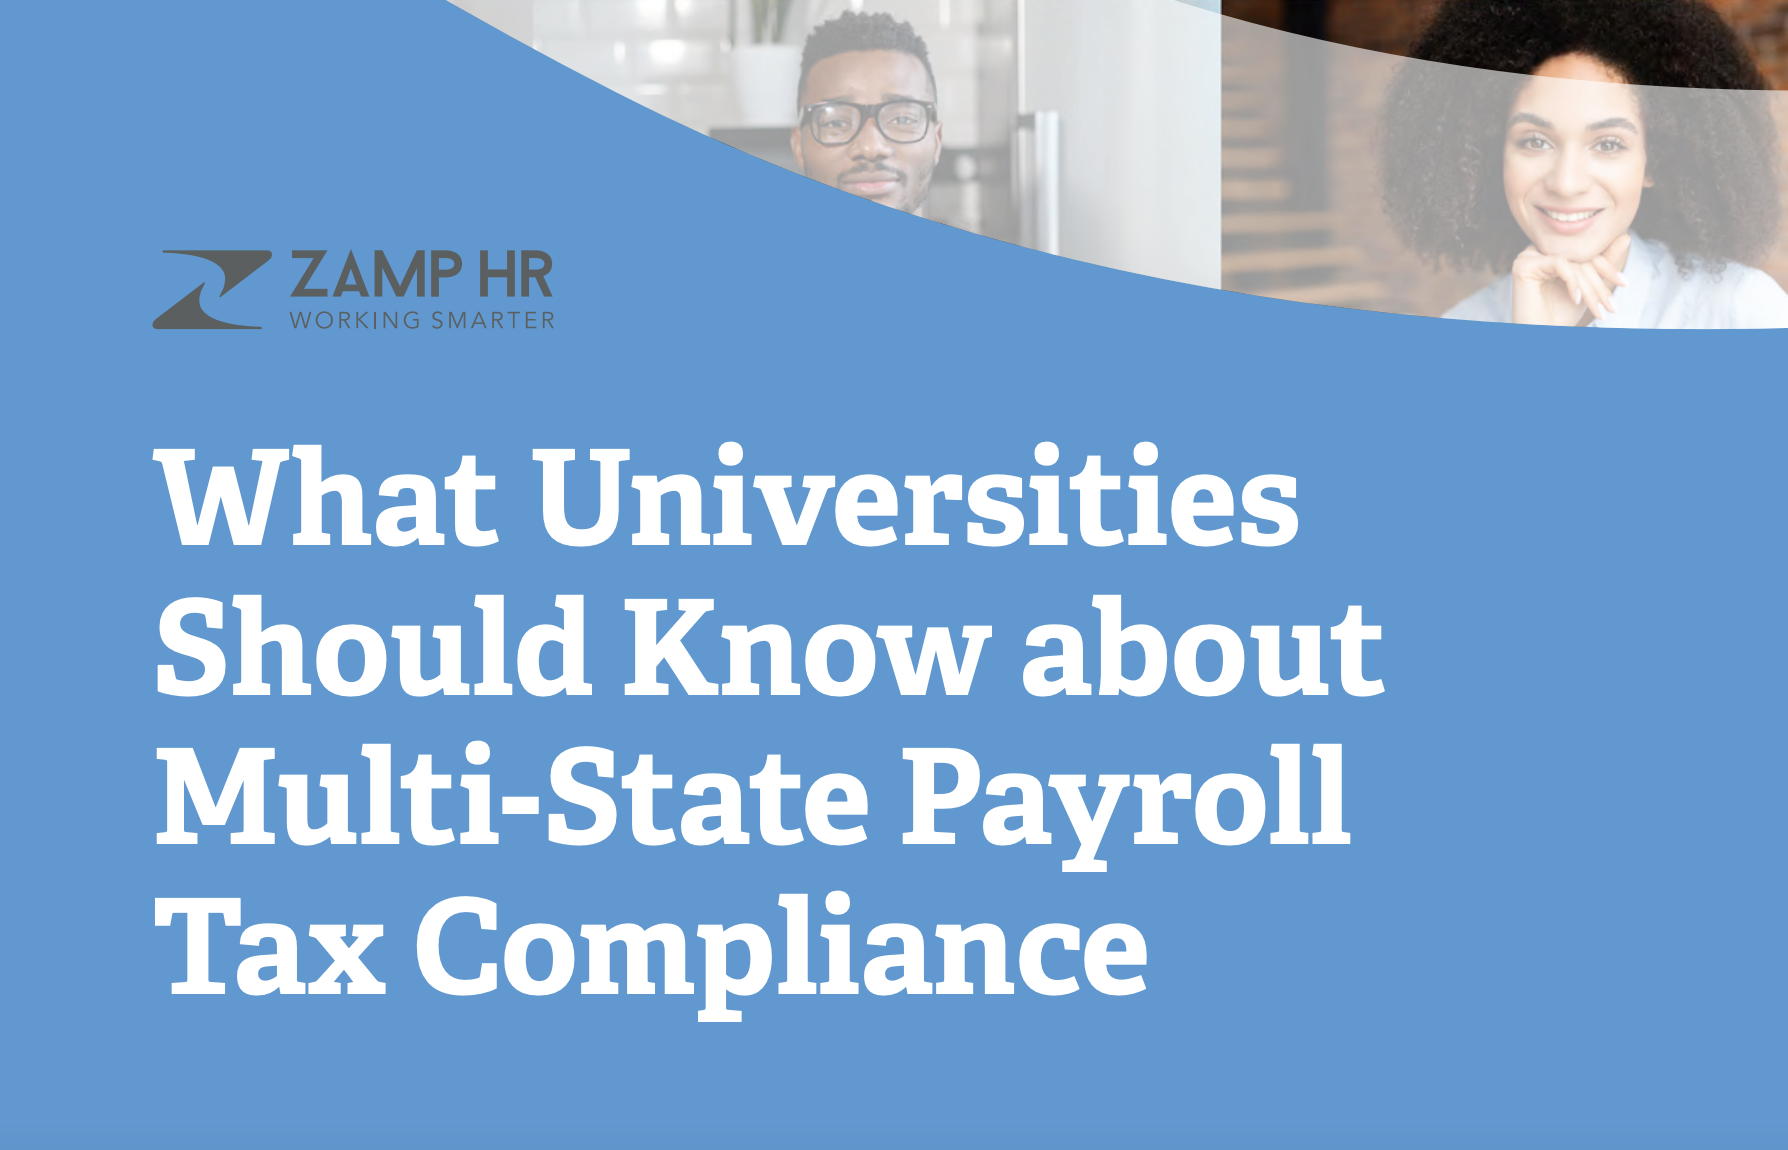 What Universities Should Know About Multi-State Payroll Tax Compliance